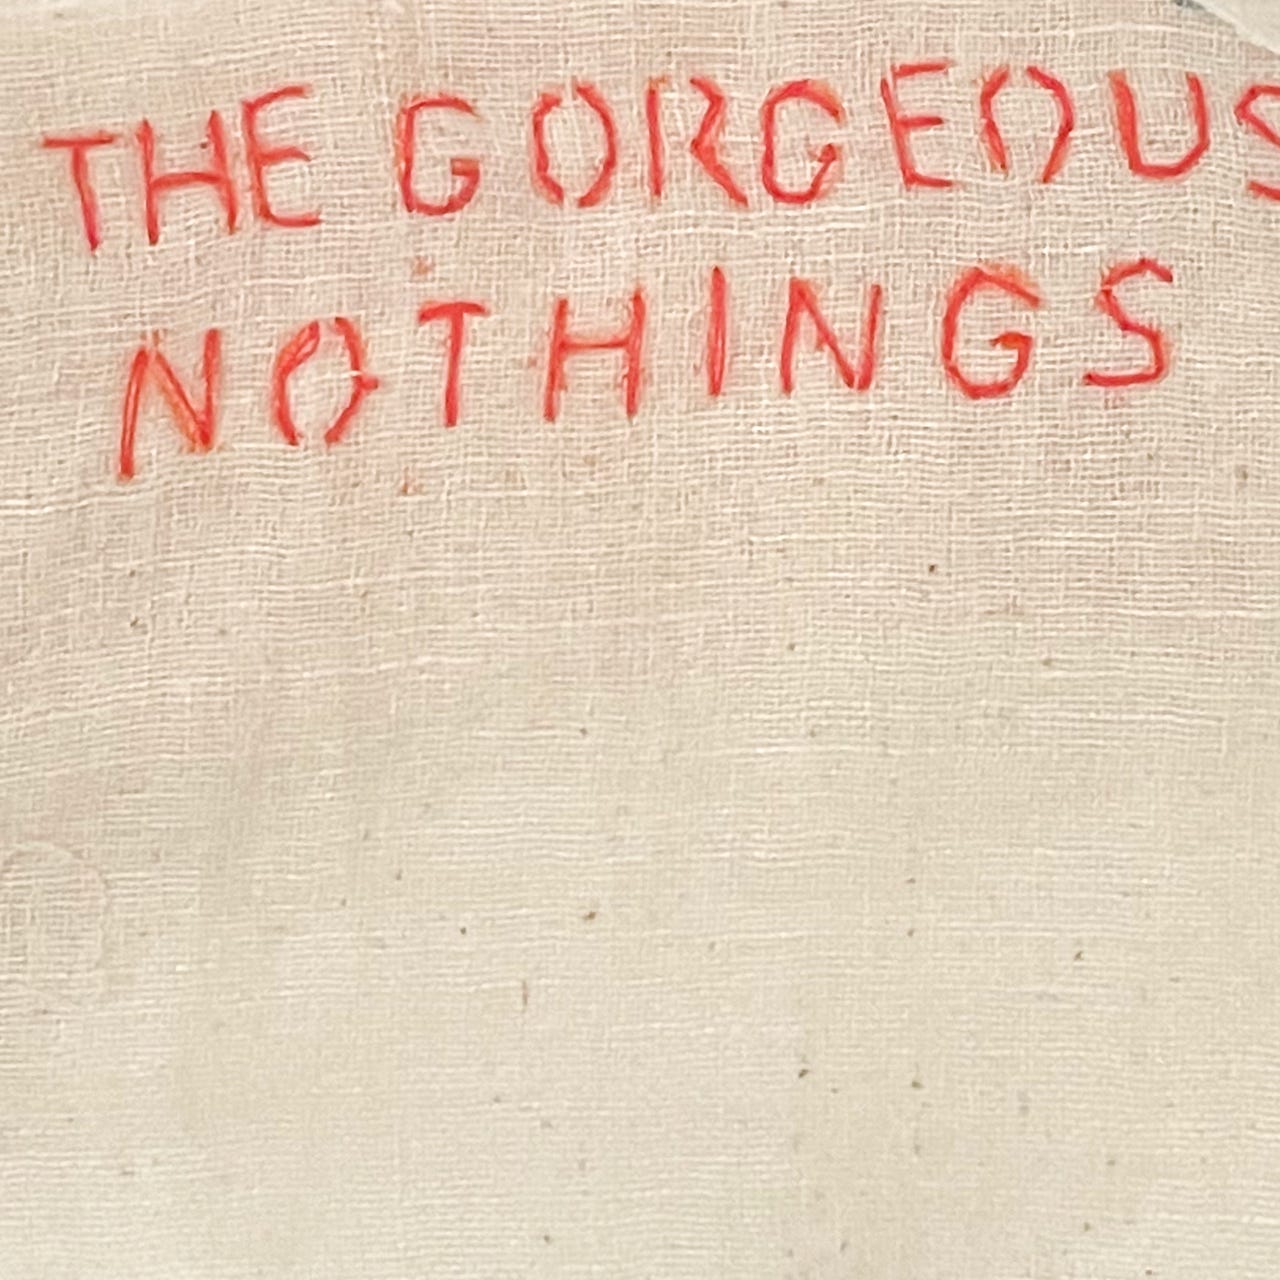 Artwork for The Gorgeous Nothings